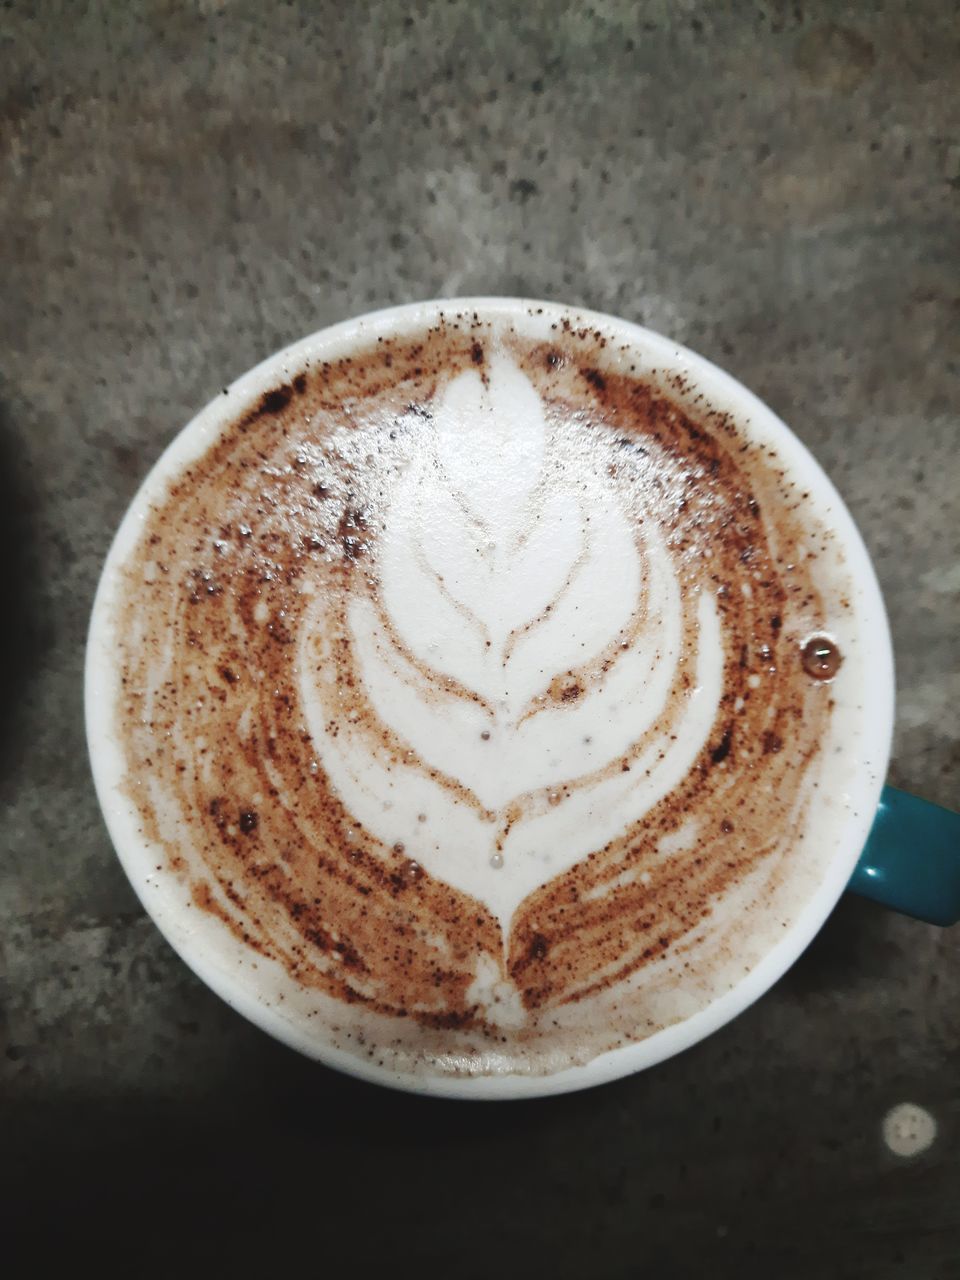 CLOSE-UP OF CAPPUCCINO